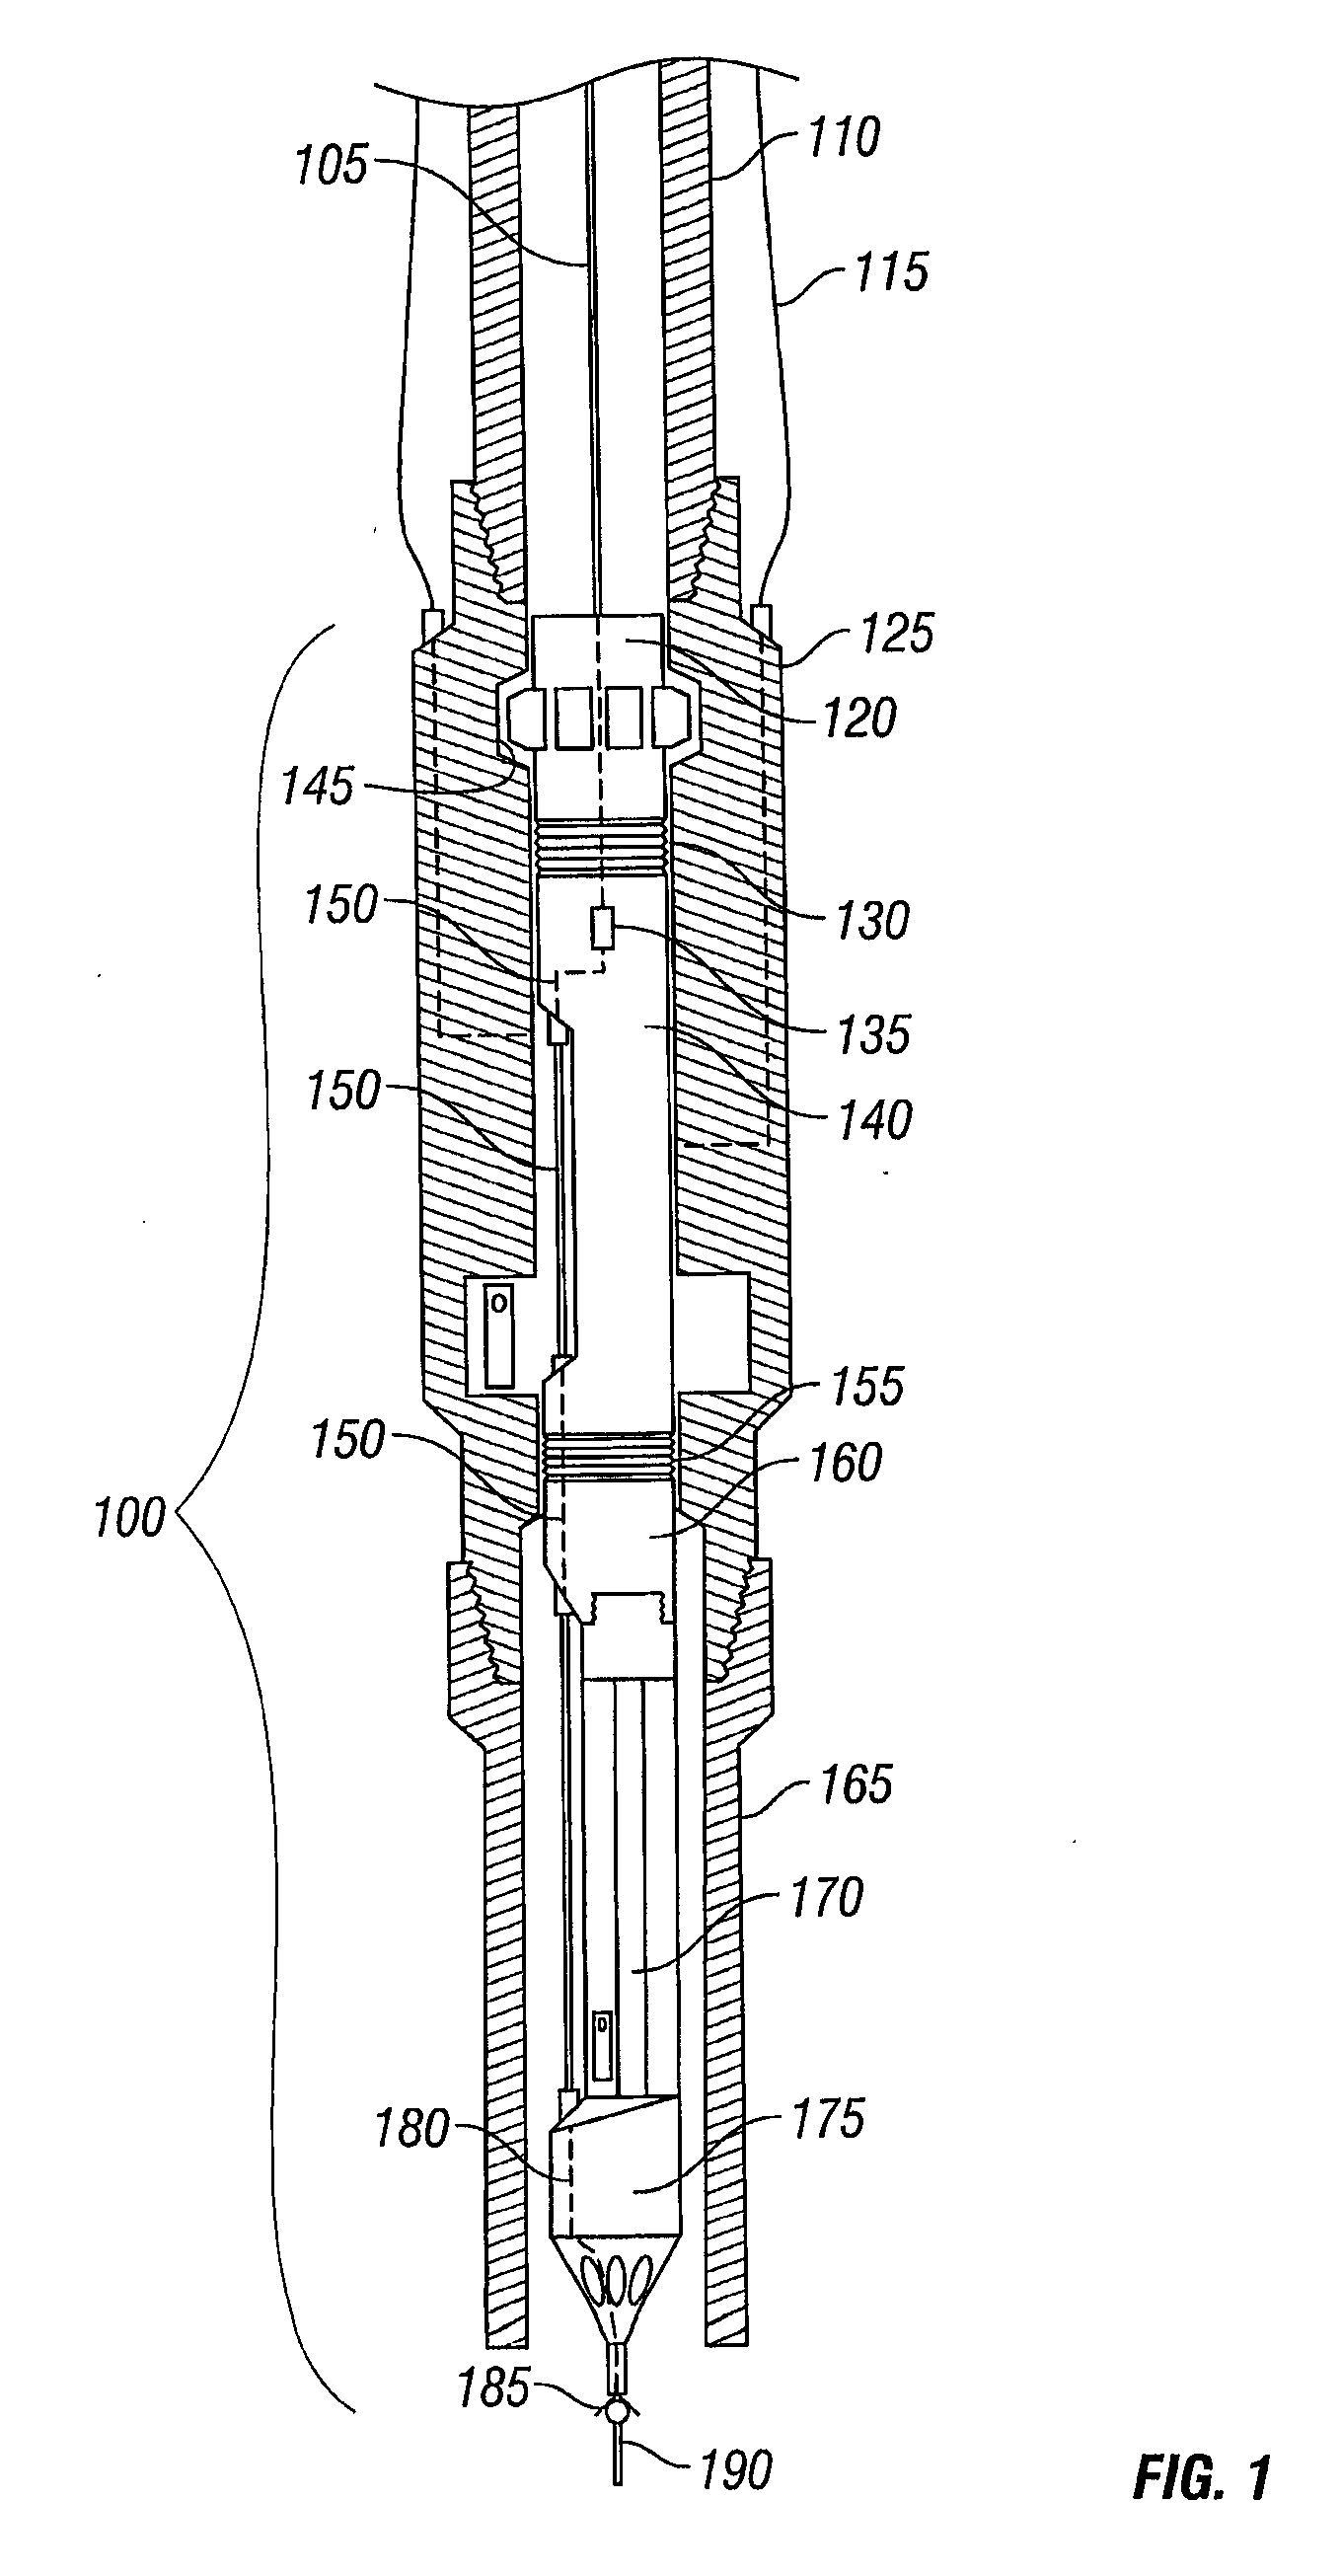 Method and Apparatus for Continuously Injecting Fluid in a Wellbore While Maintaining Safety Valve Operation